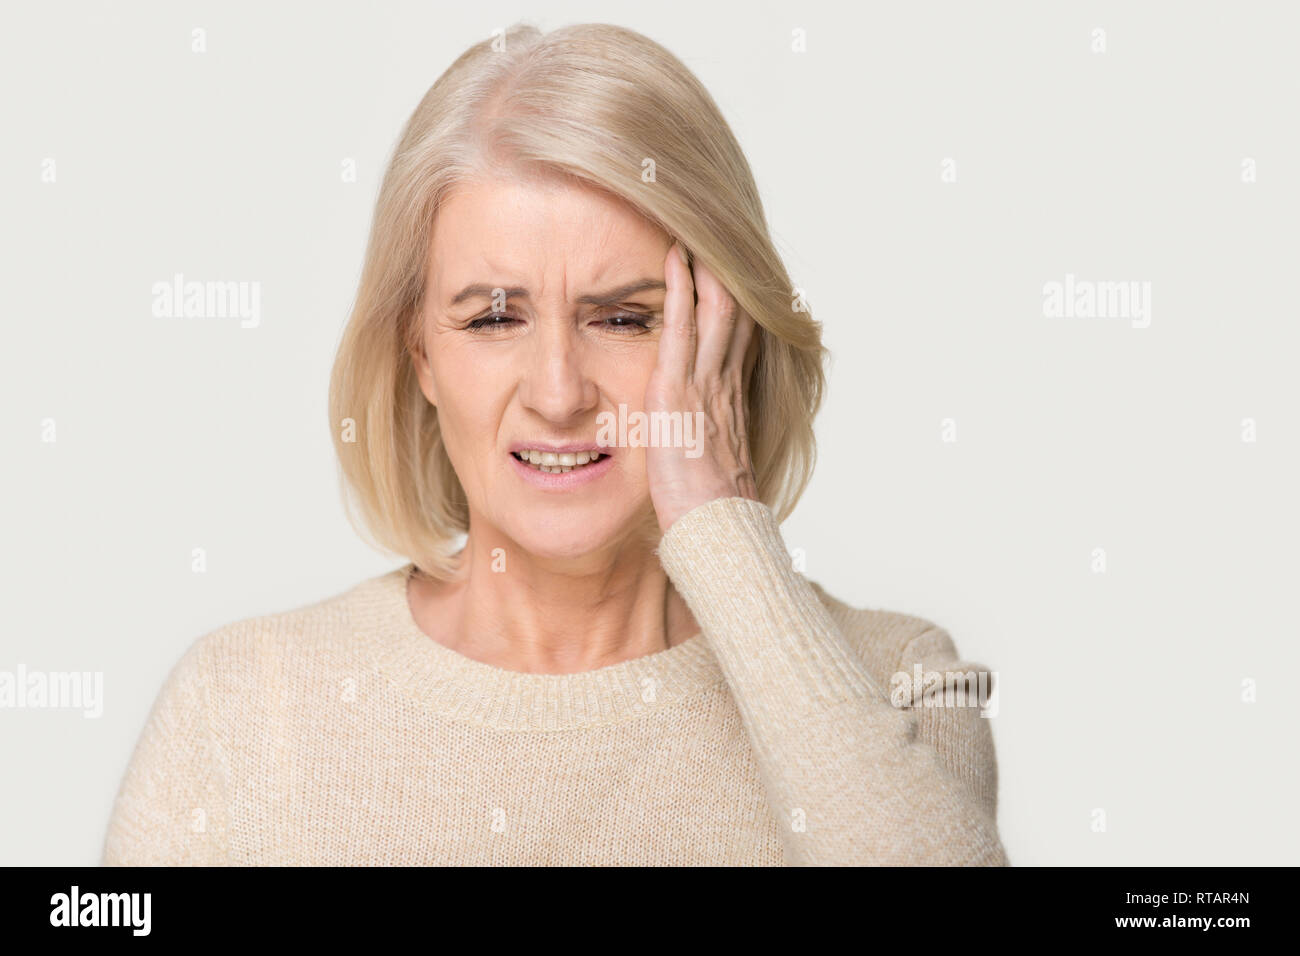 Stressed upset middle aged woman suffering from terrible headache concept Stock Photo